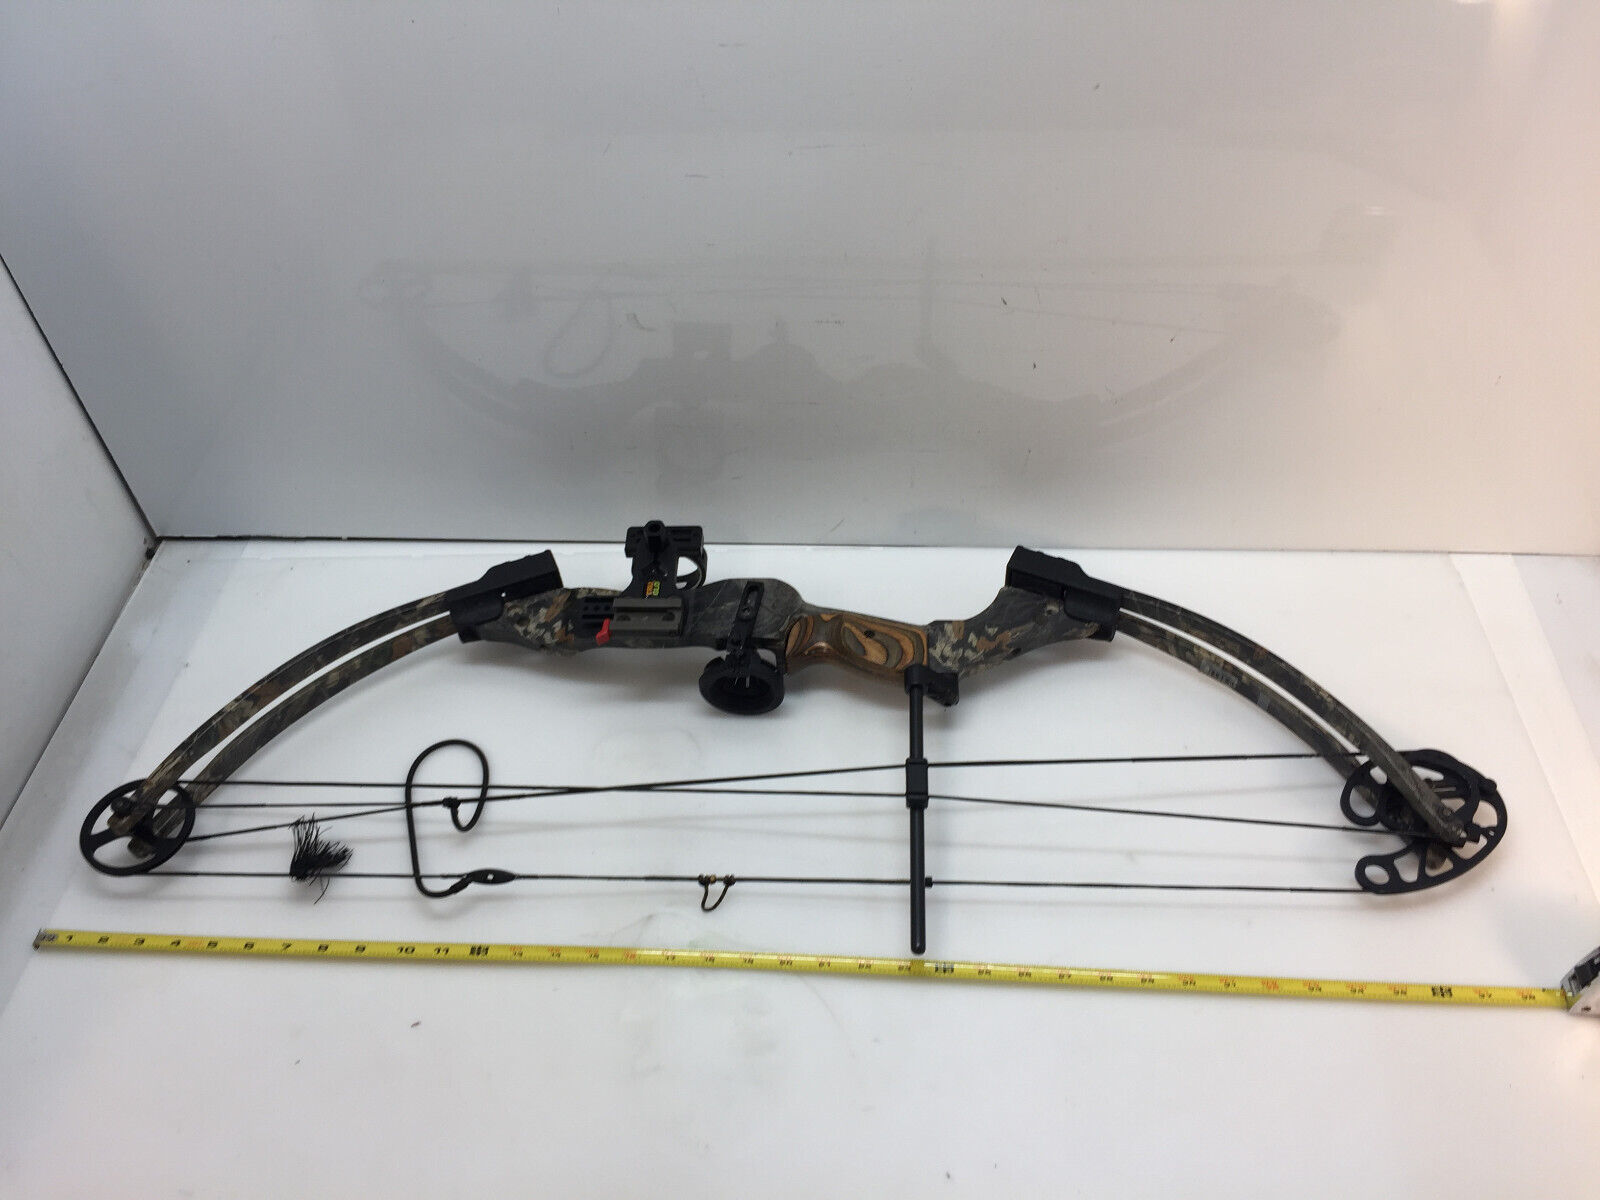 Martin Pantera Compound Bow Specifications